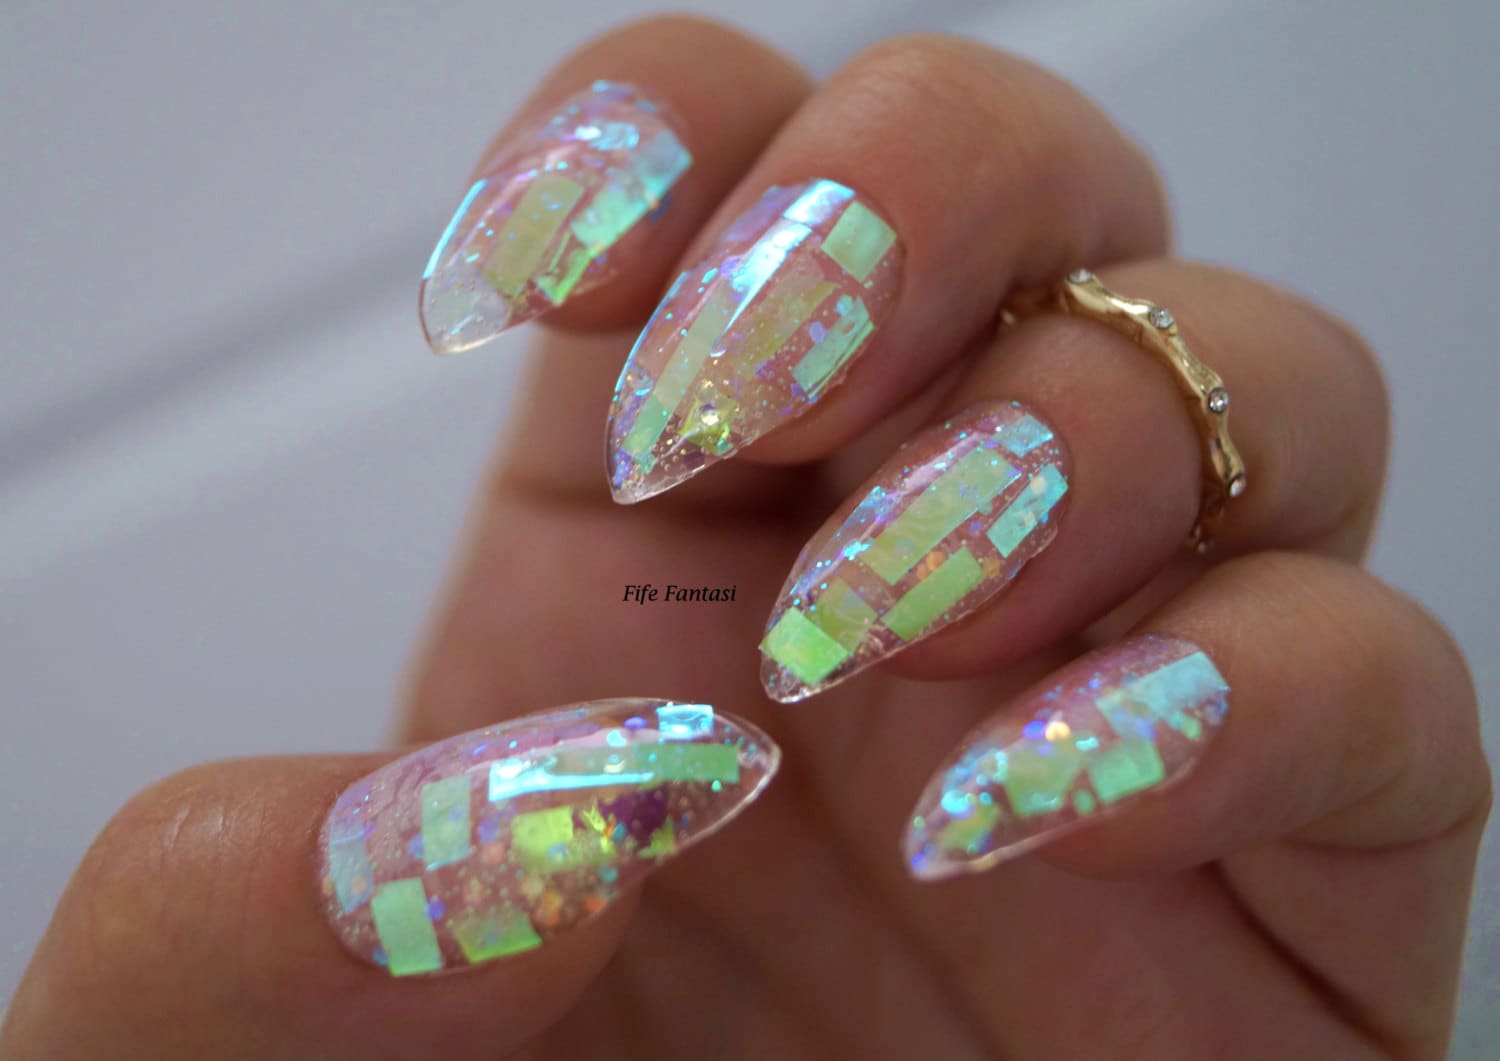 Etched Glass Nail Design Ideas - wide 1